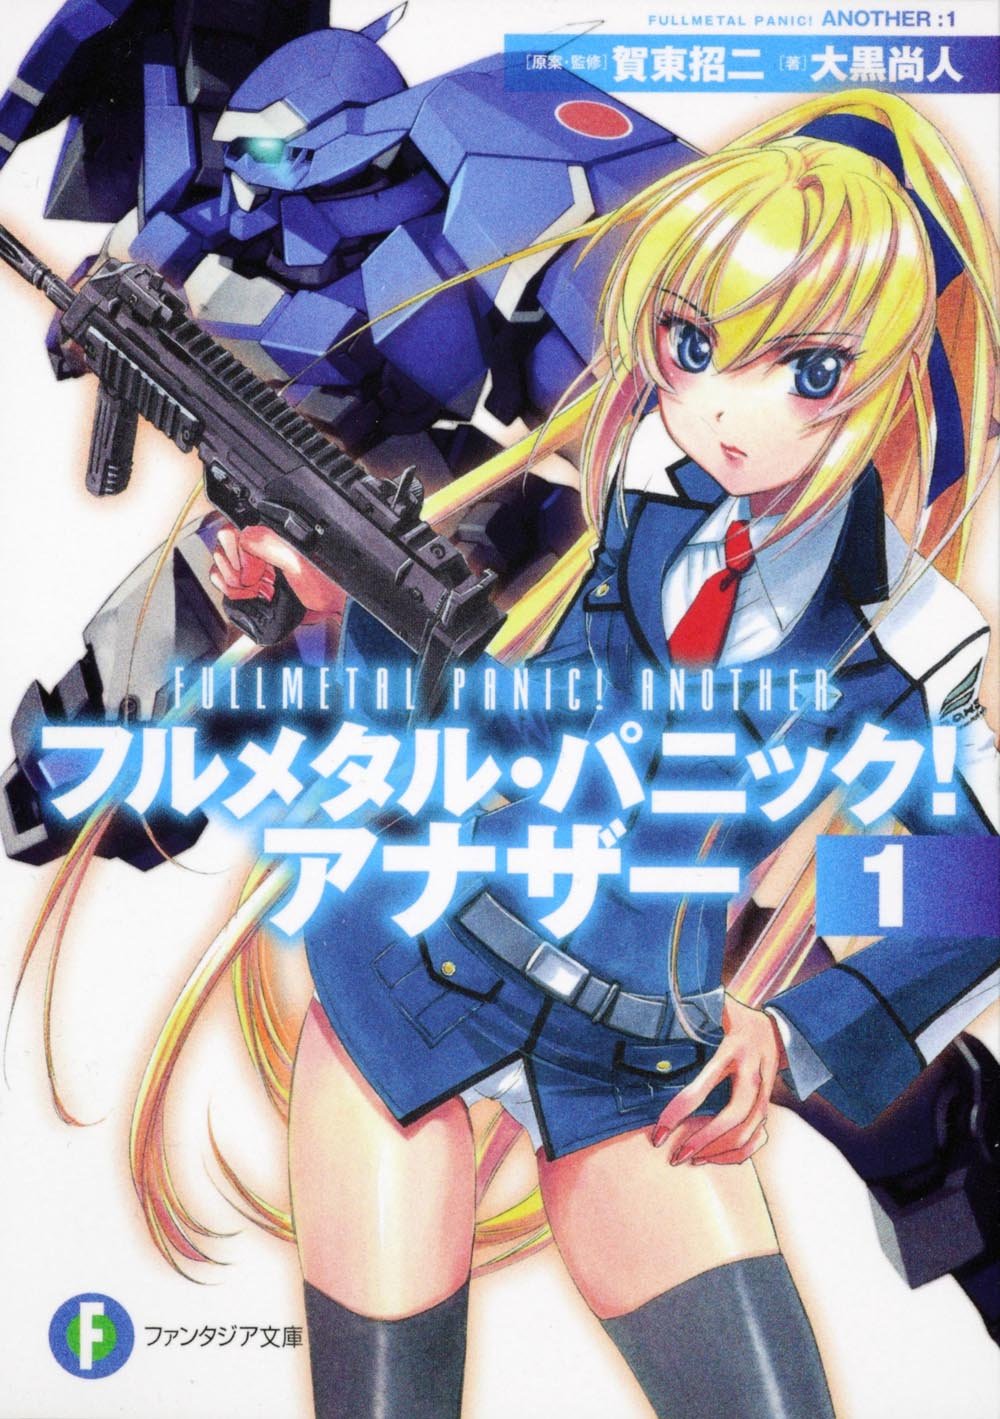 1girl adelina arm_slave_(mecha) as-1_blaze_raven bike_shorts blue_jacket blush collared_shirt cover cover_page eyebrows_visible_through_hair full_metal_panic! full_metal_panic!_another glowing glowing_eye gun h&amp;k_mp7 hand_on_hip highres holding holding_gun holding_weapon jacket leaning_to_the_side mecha necktie novel_cover official_art ponytail red_necktie scan science_fiction shikidouji shirt shorts submachine_gun thigh-highs weapon white_shirt white_shorts